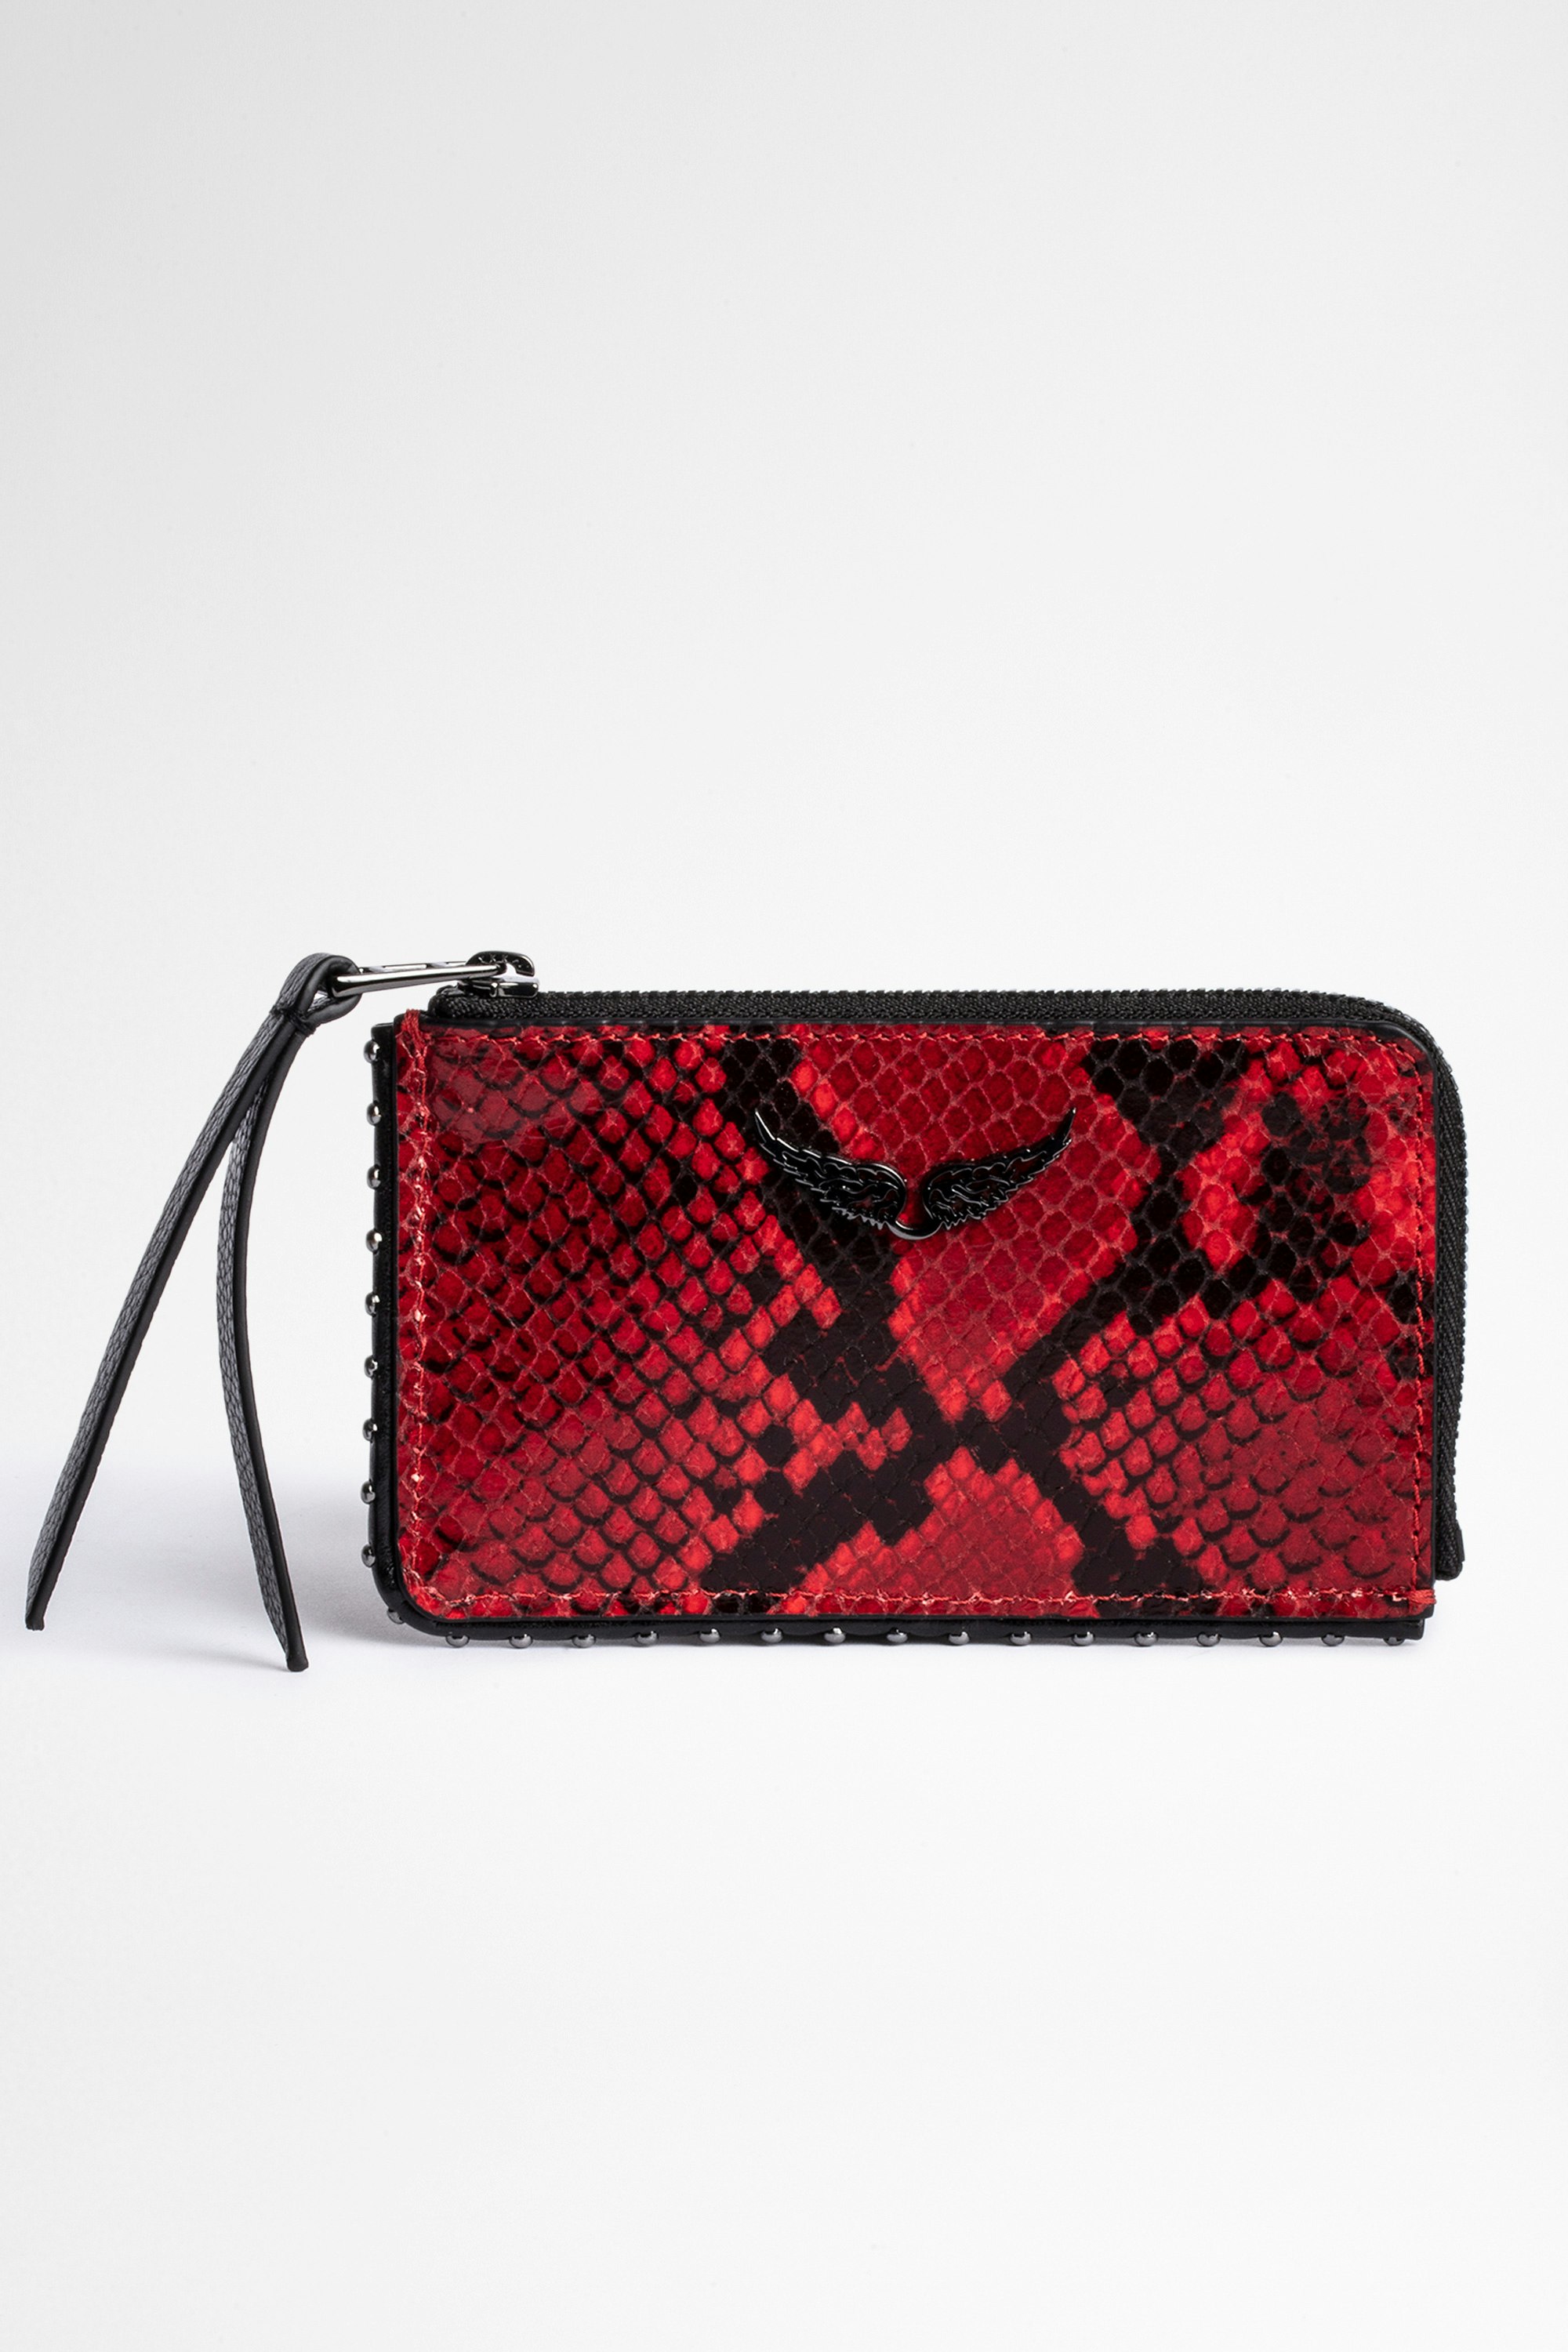 ZV Card Holder Women's red leather card holder with snakeskin effect